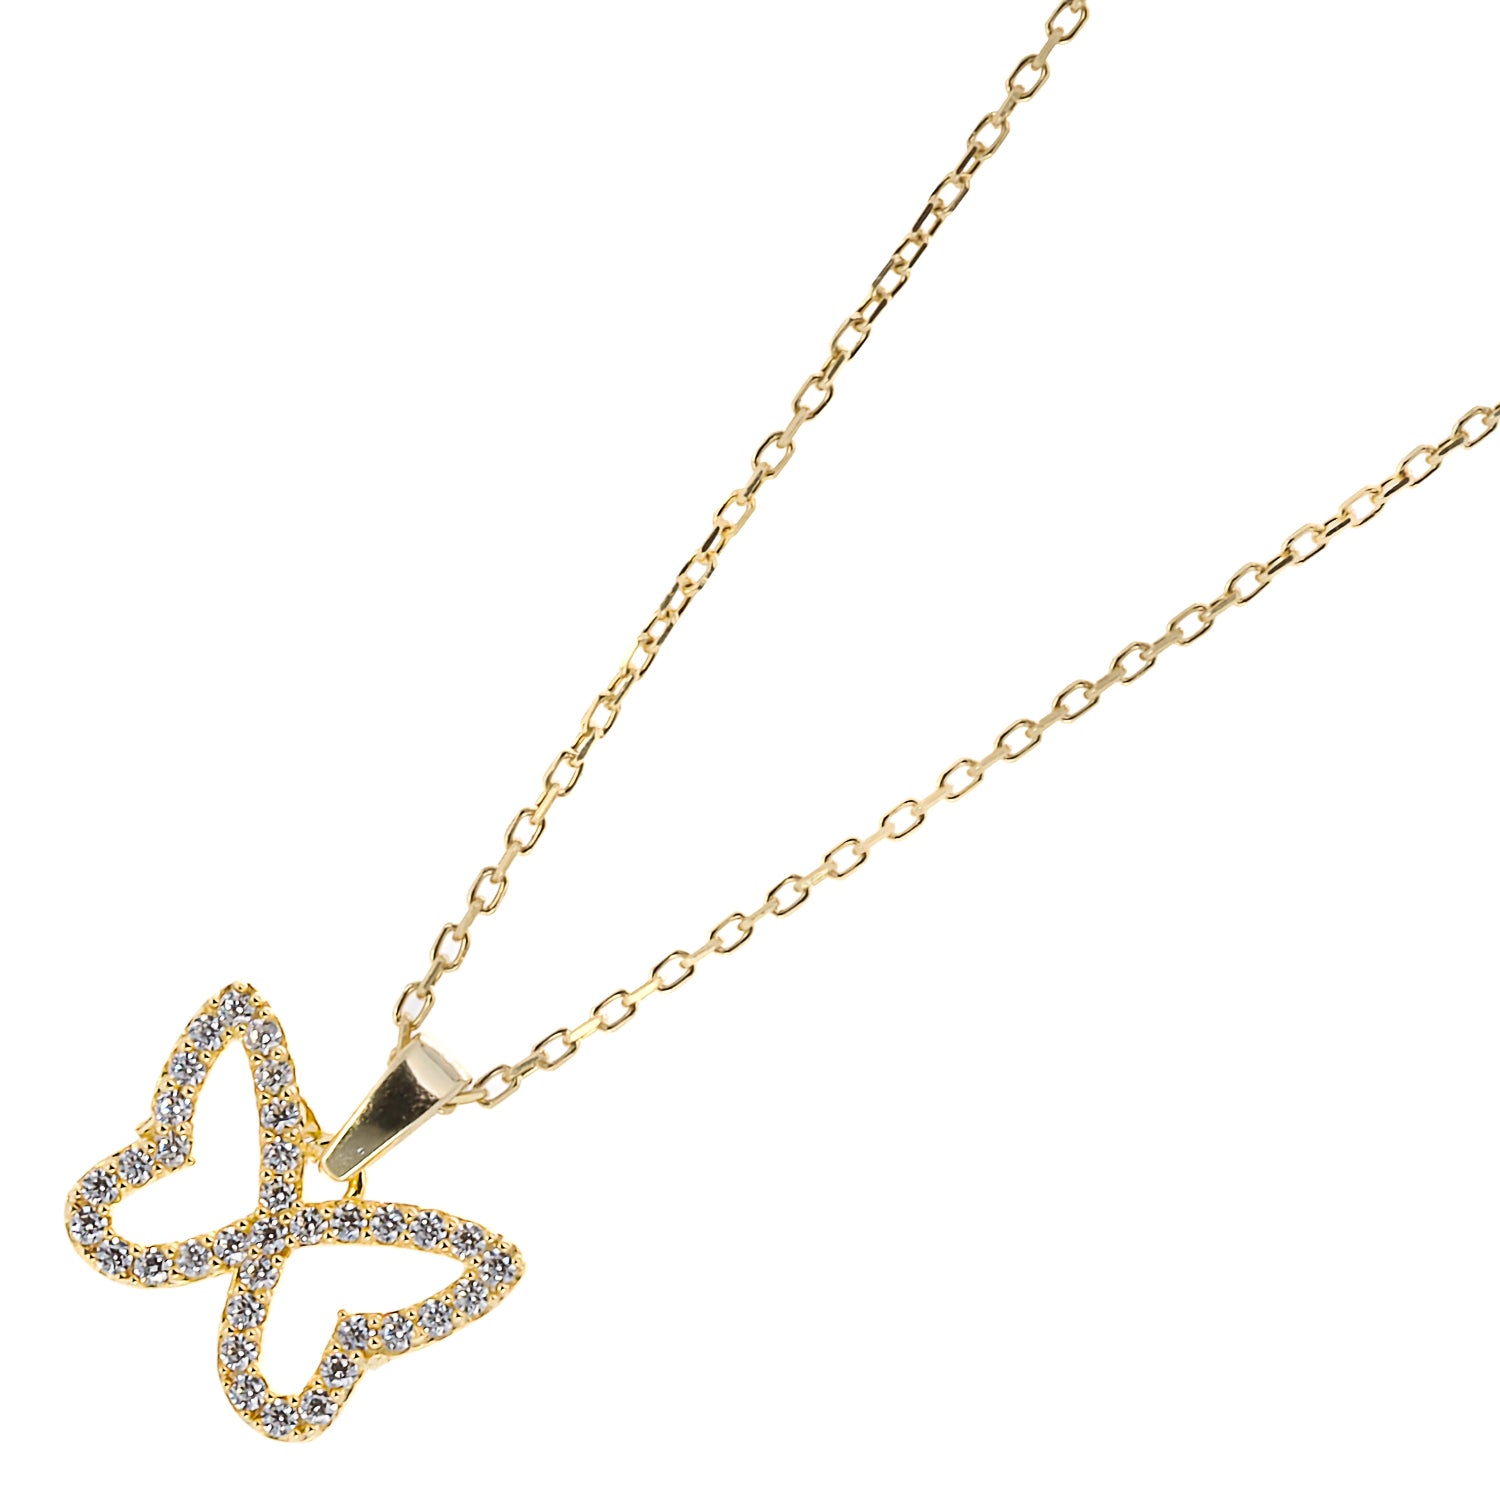 The elegant 925 Sterling silver chain of the Gold Sparkly Butterfly Necklace.